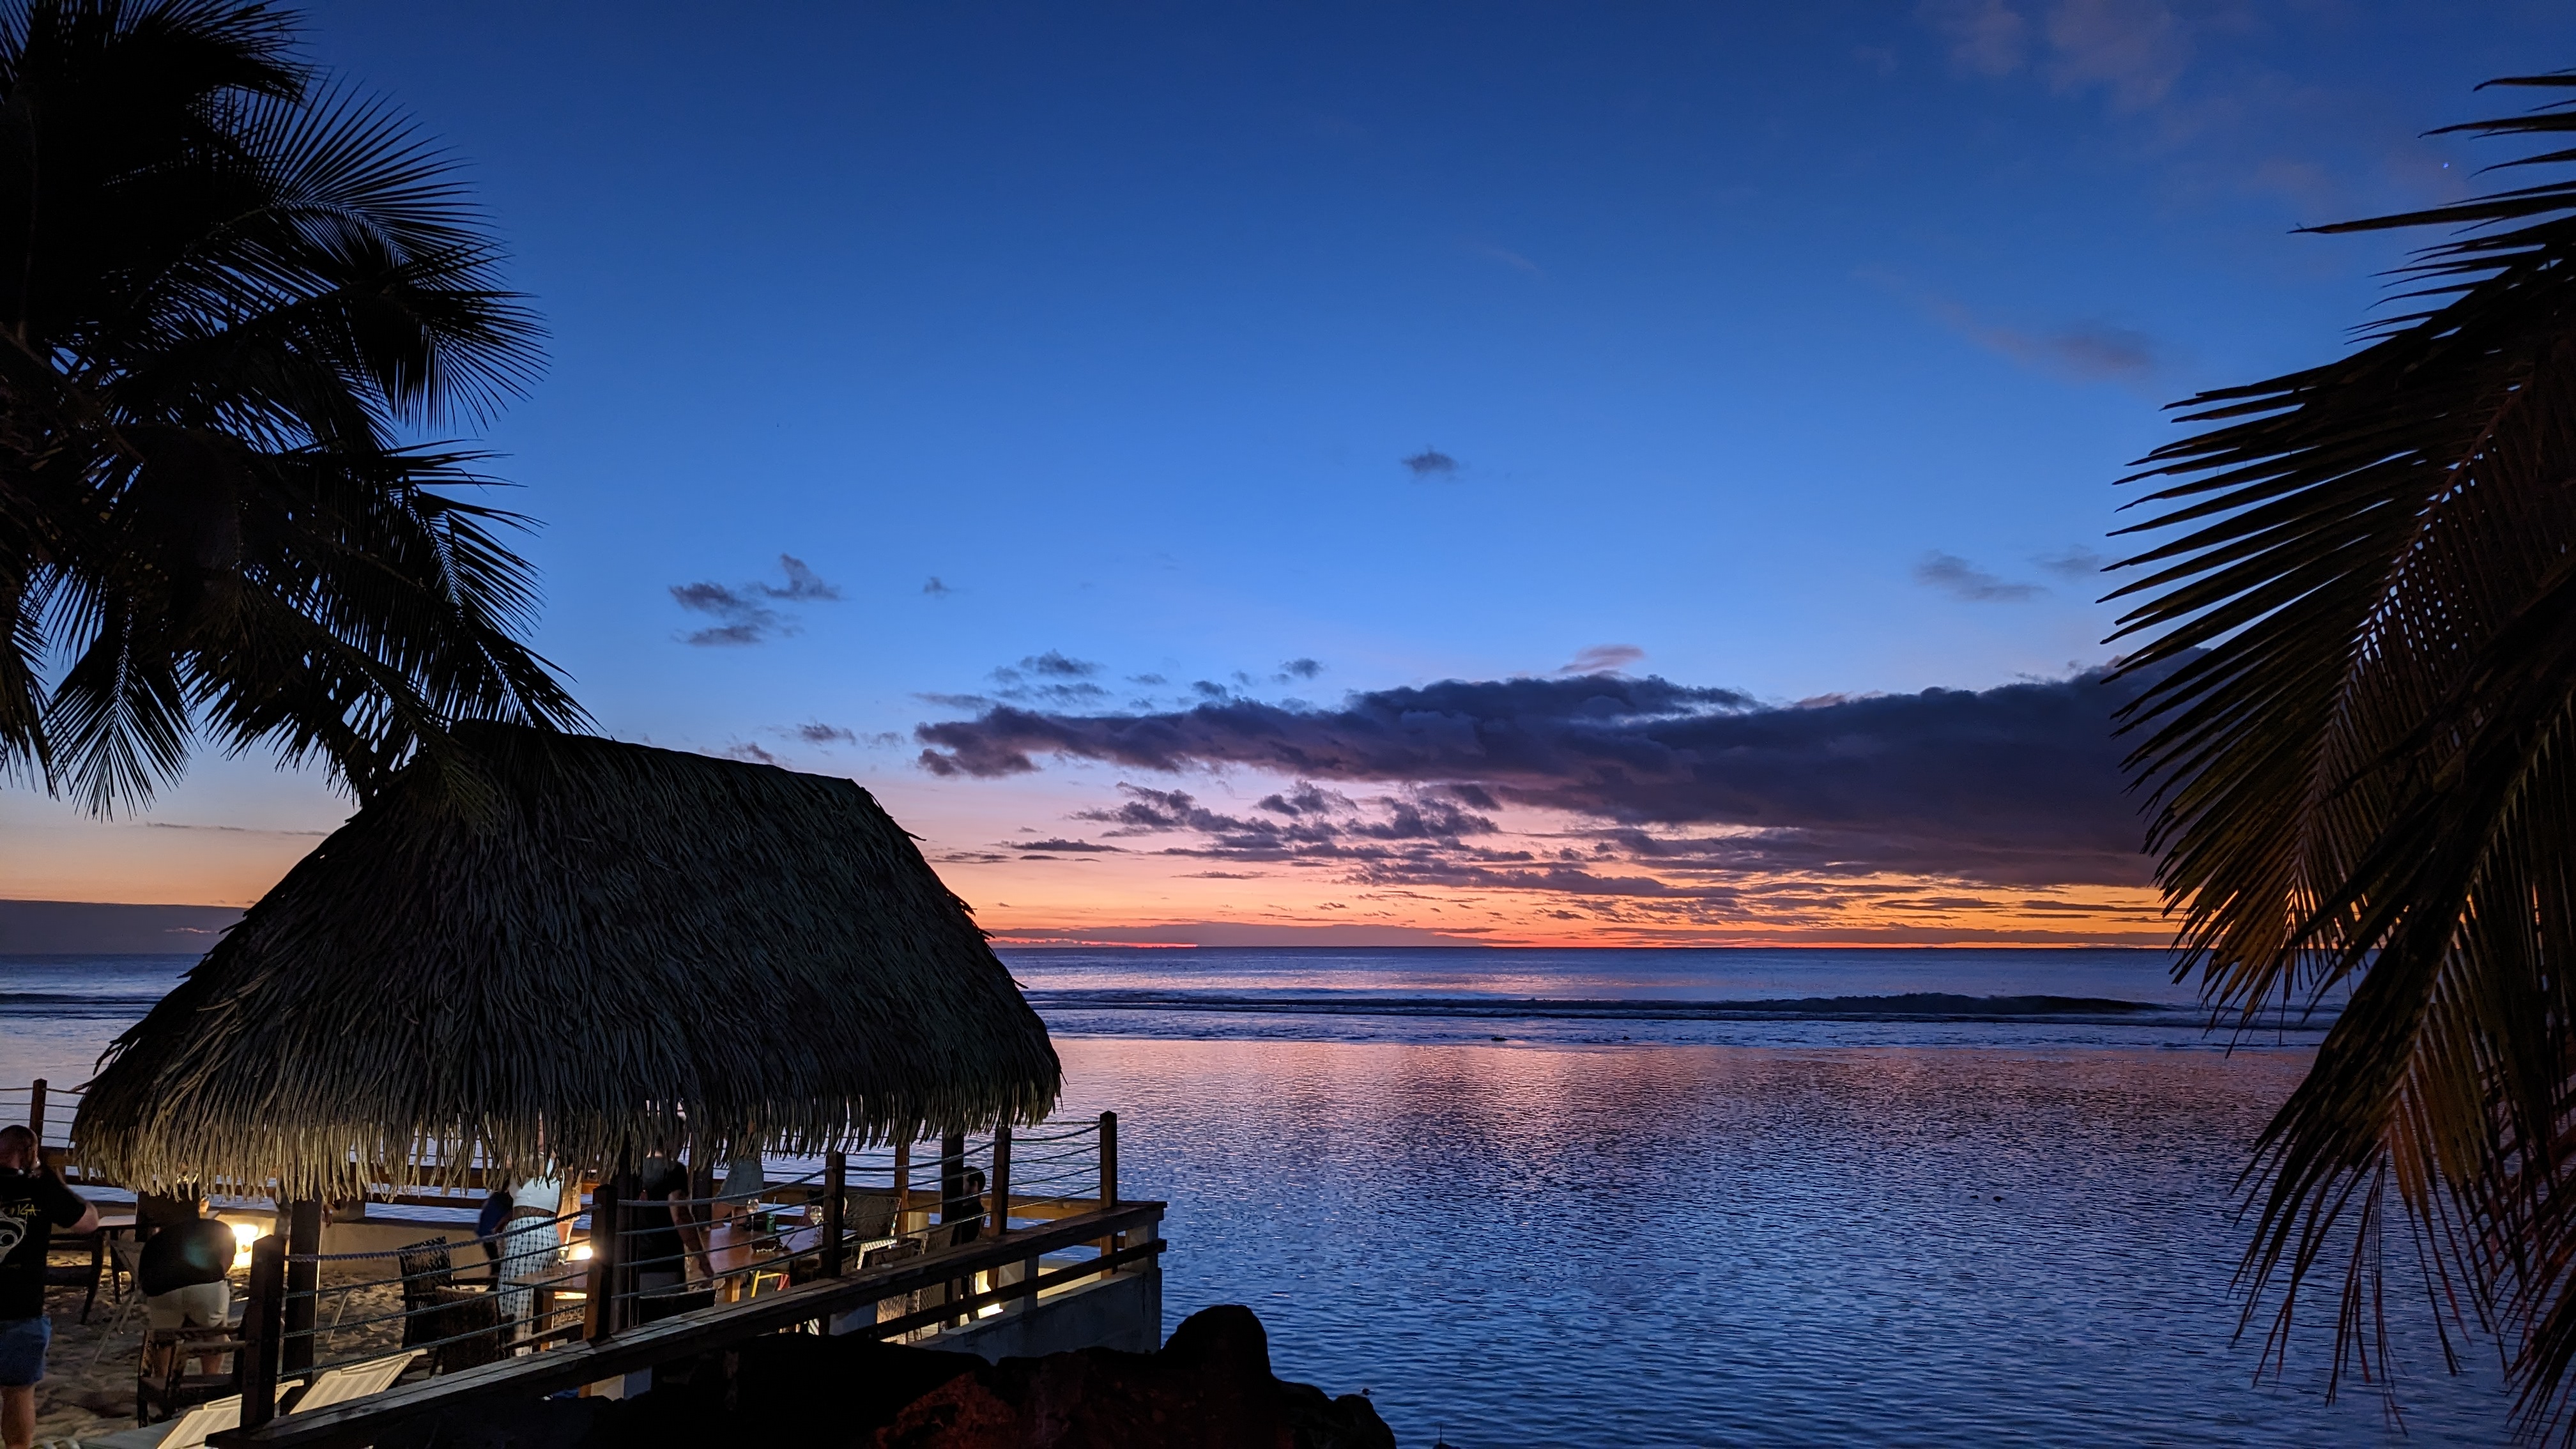 Blues of the darkening sky against a sliver of orange sun, all reflected in the calm ocean. In the foreground is a resort thatched bar and palm trees.